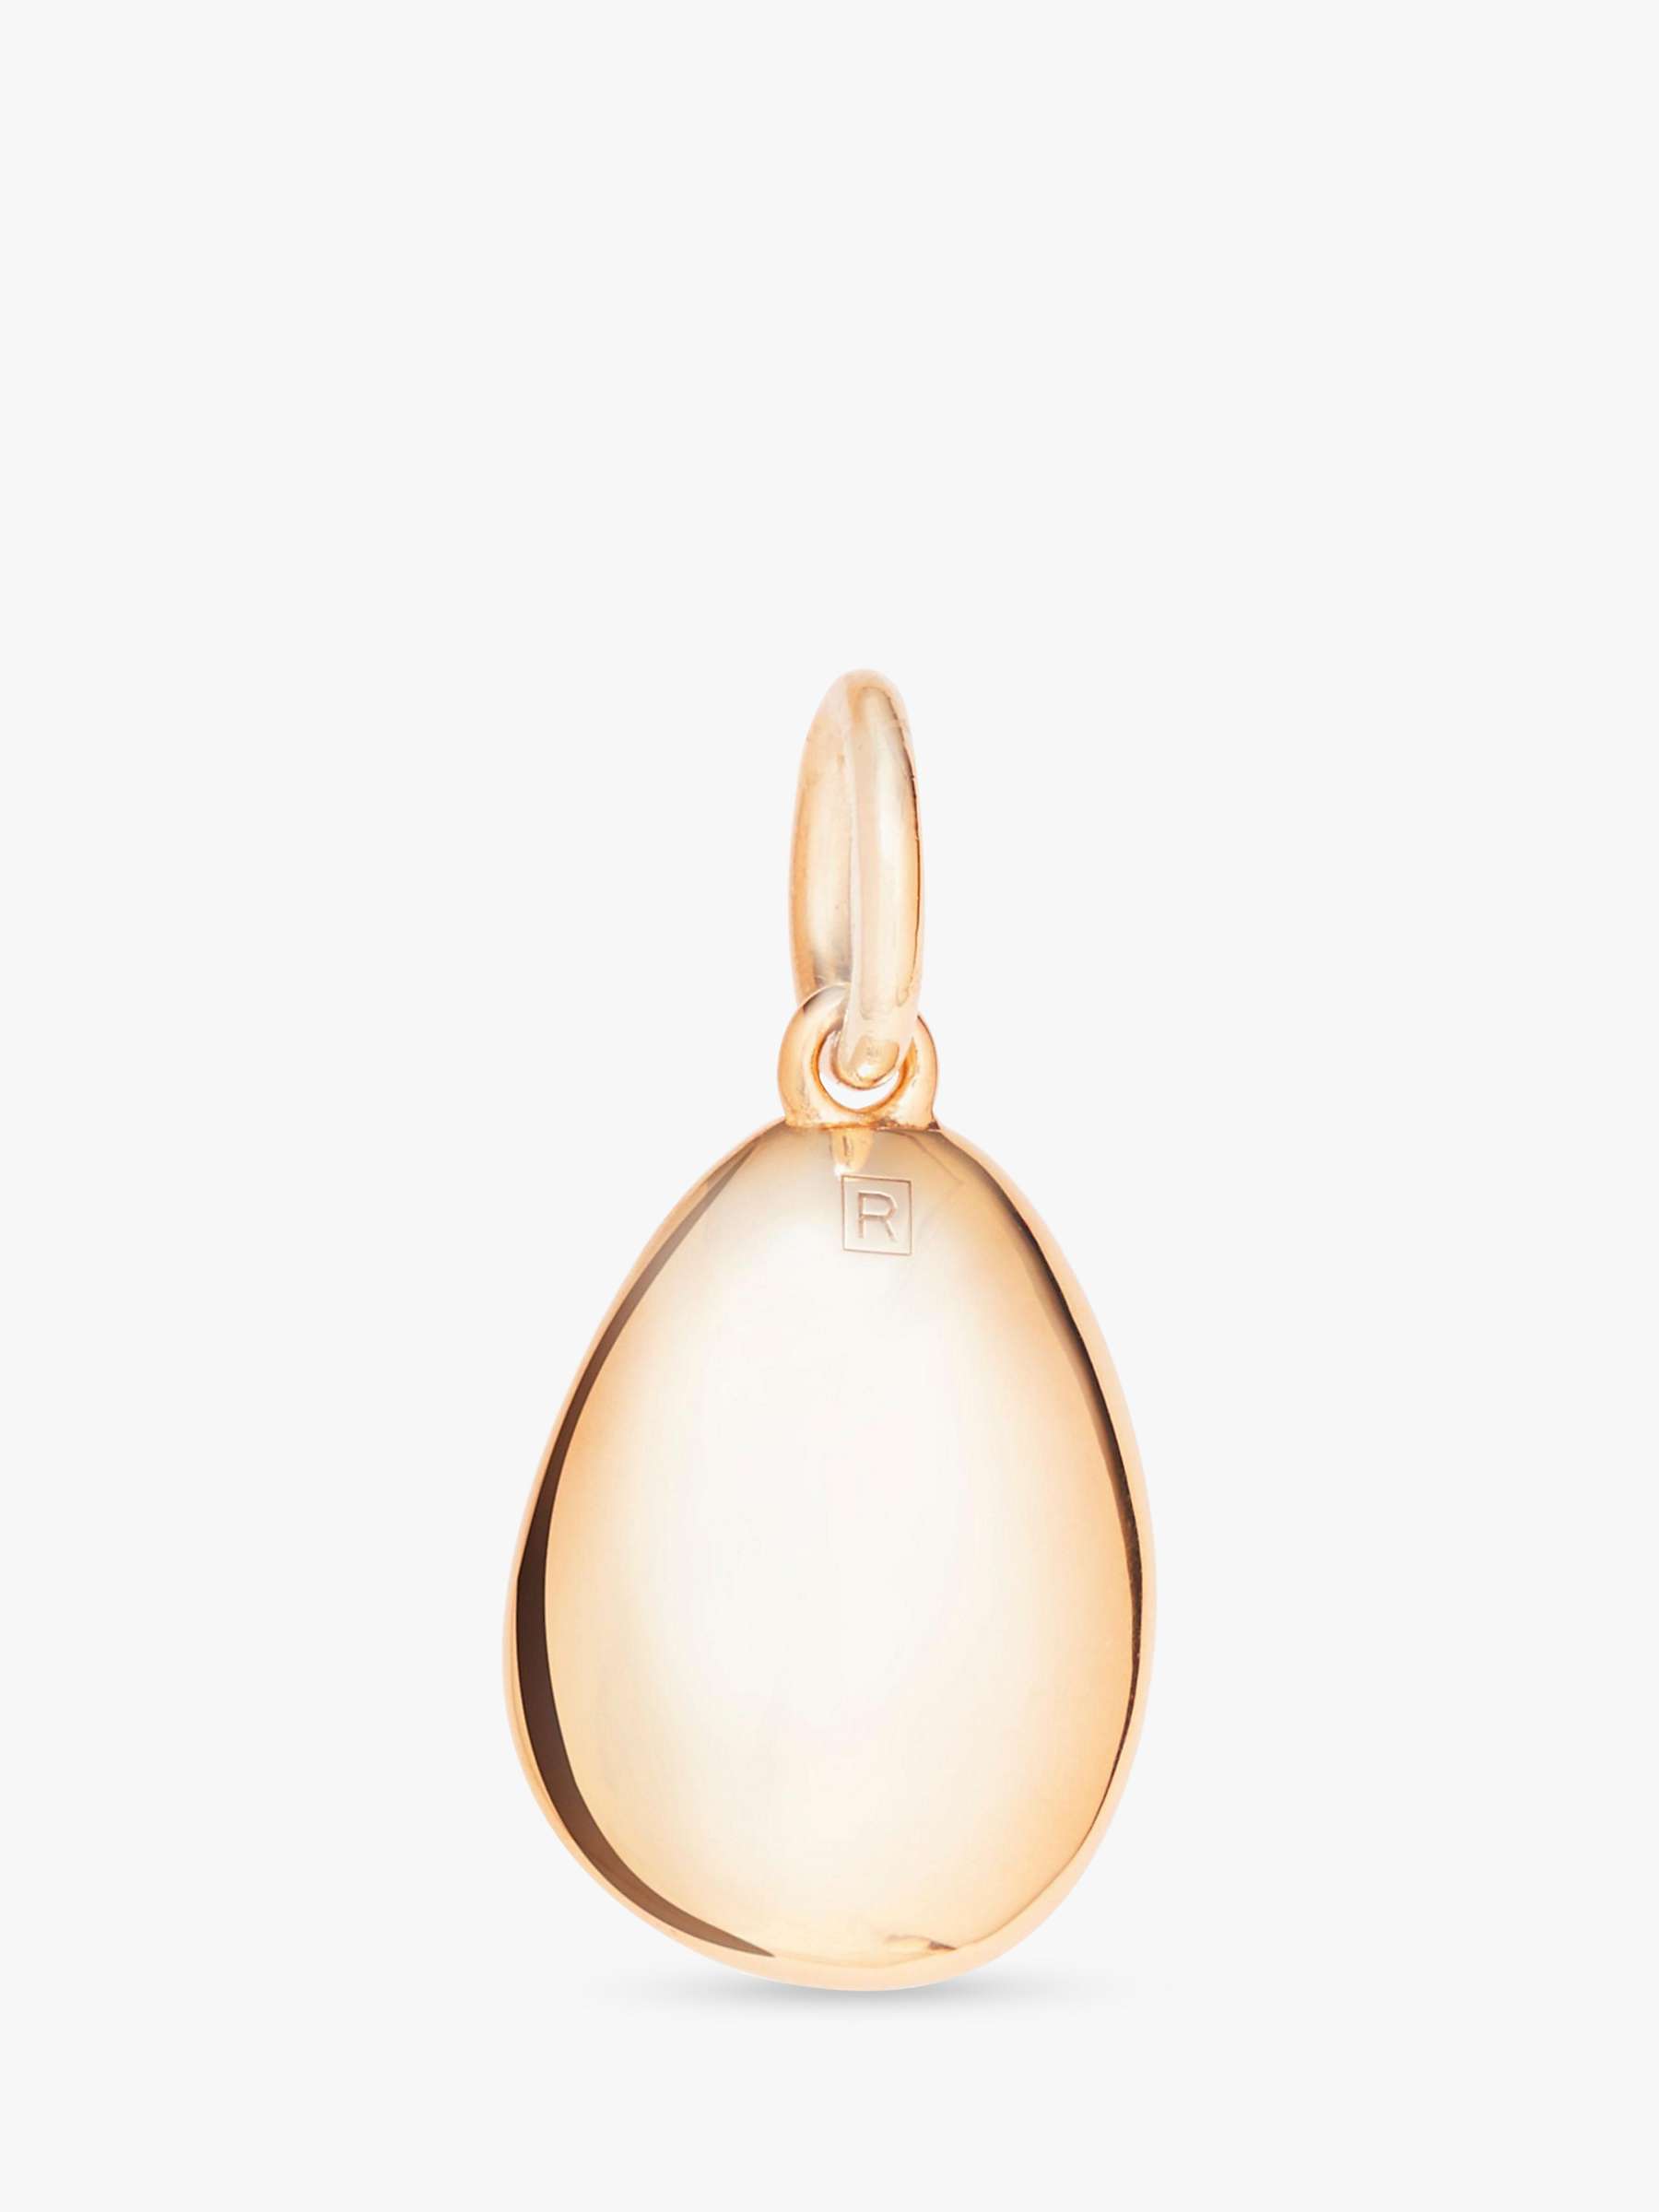 Buy Recognised Smooth Pebble Popon Pendant Charm Online at johnlewis.com